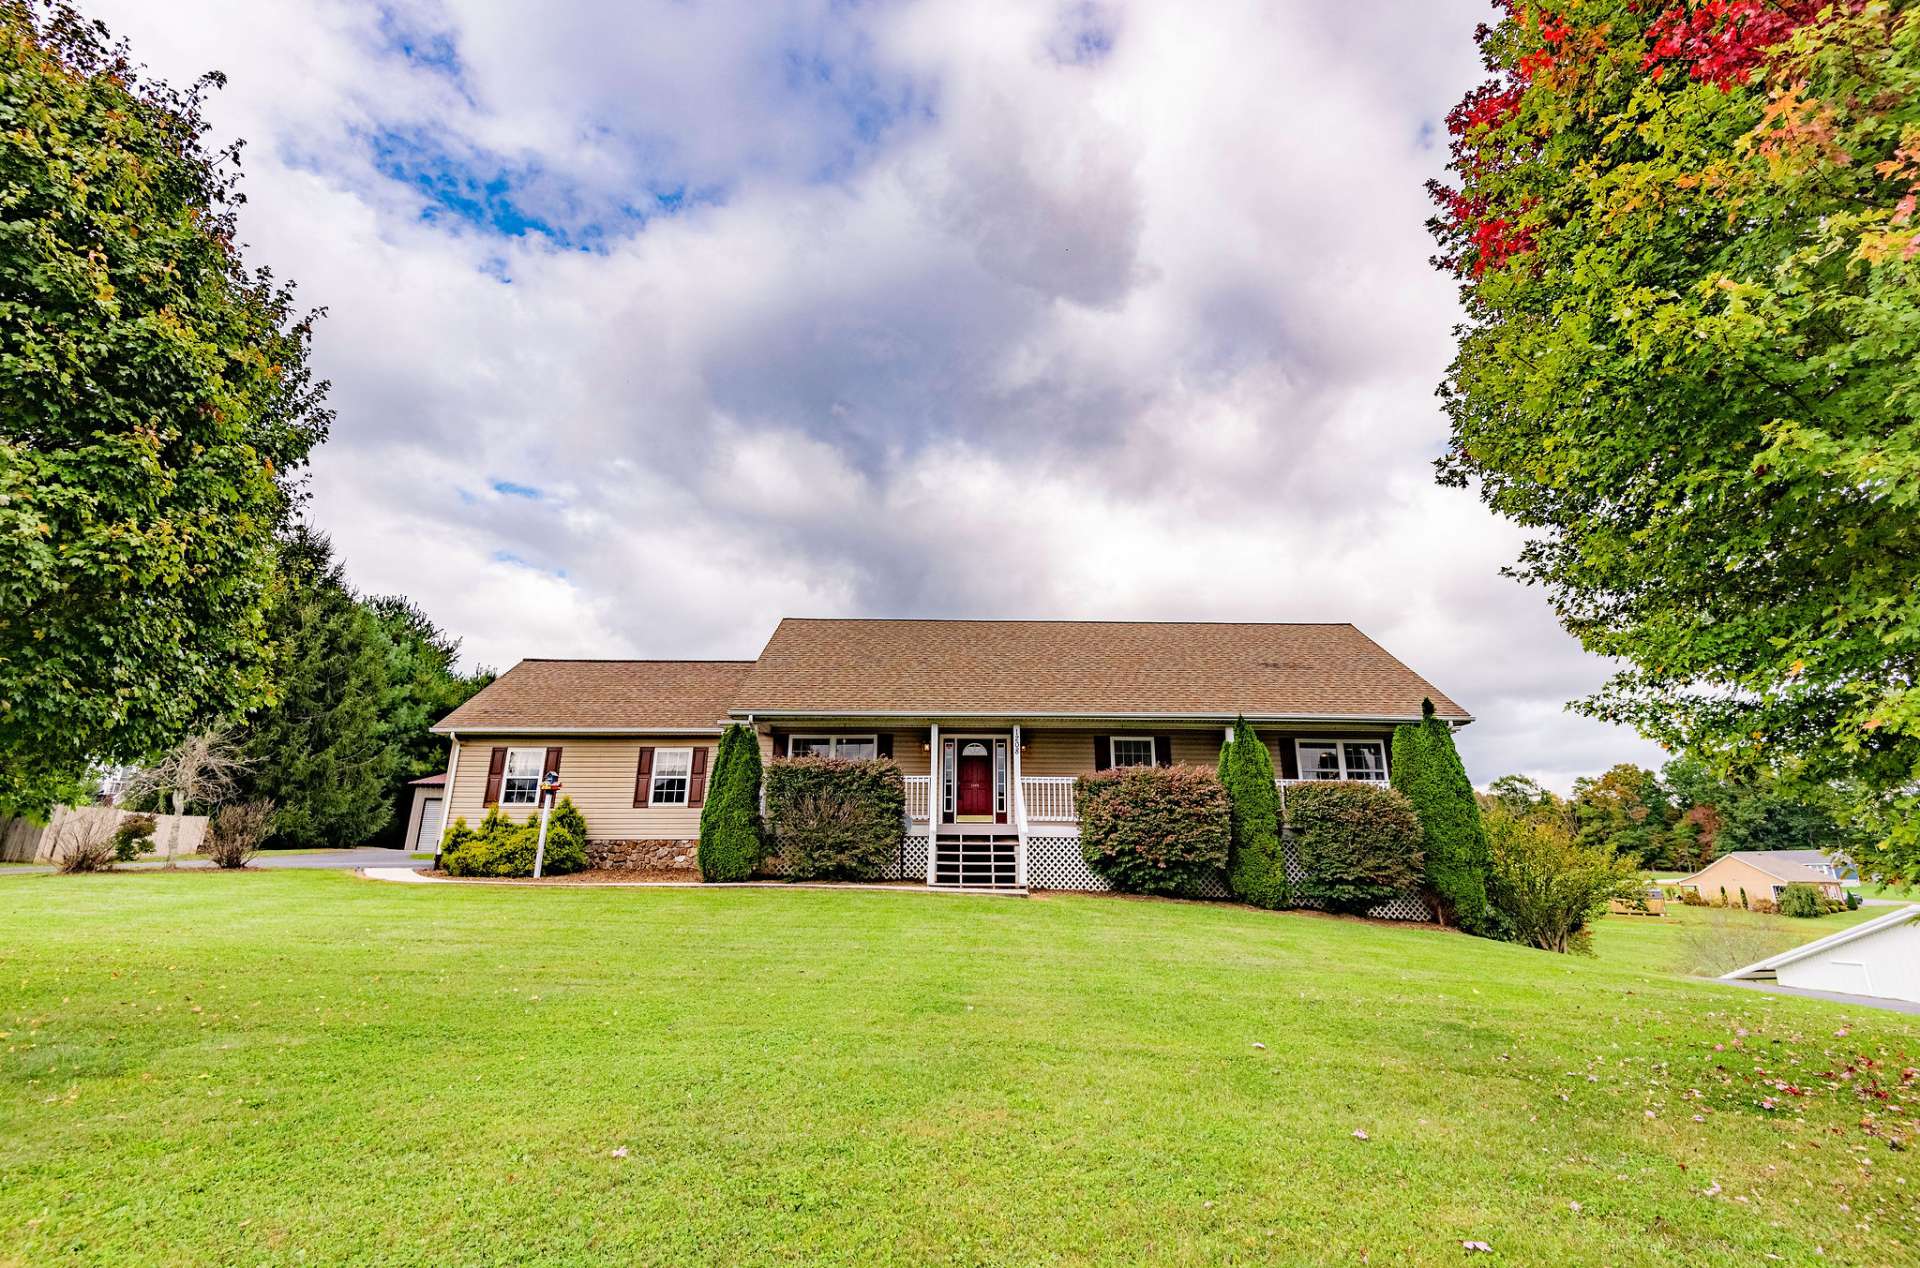 This home is located in Big Flatts Acres, a well established community in the Fleetwood area of Ashe County.